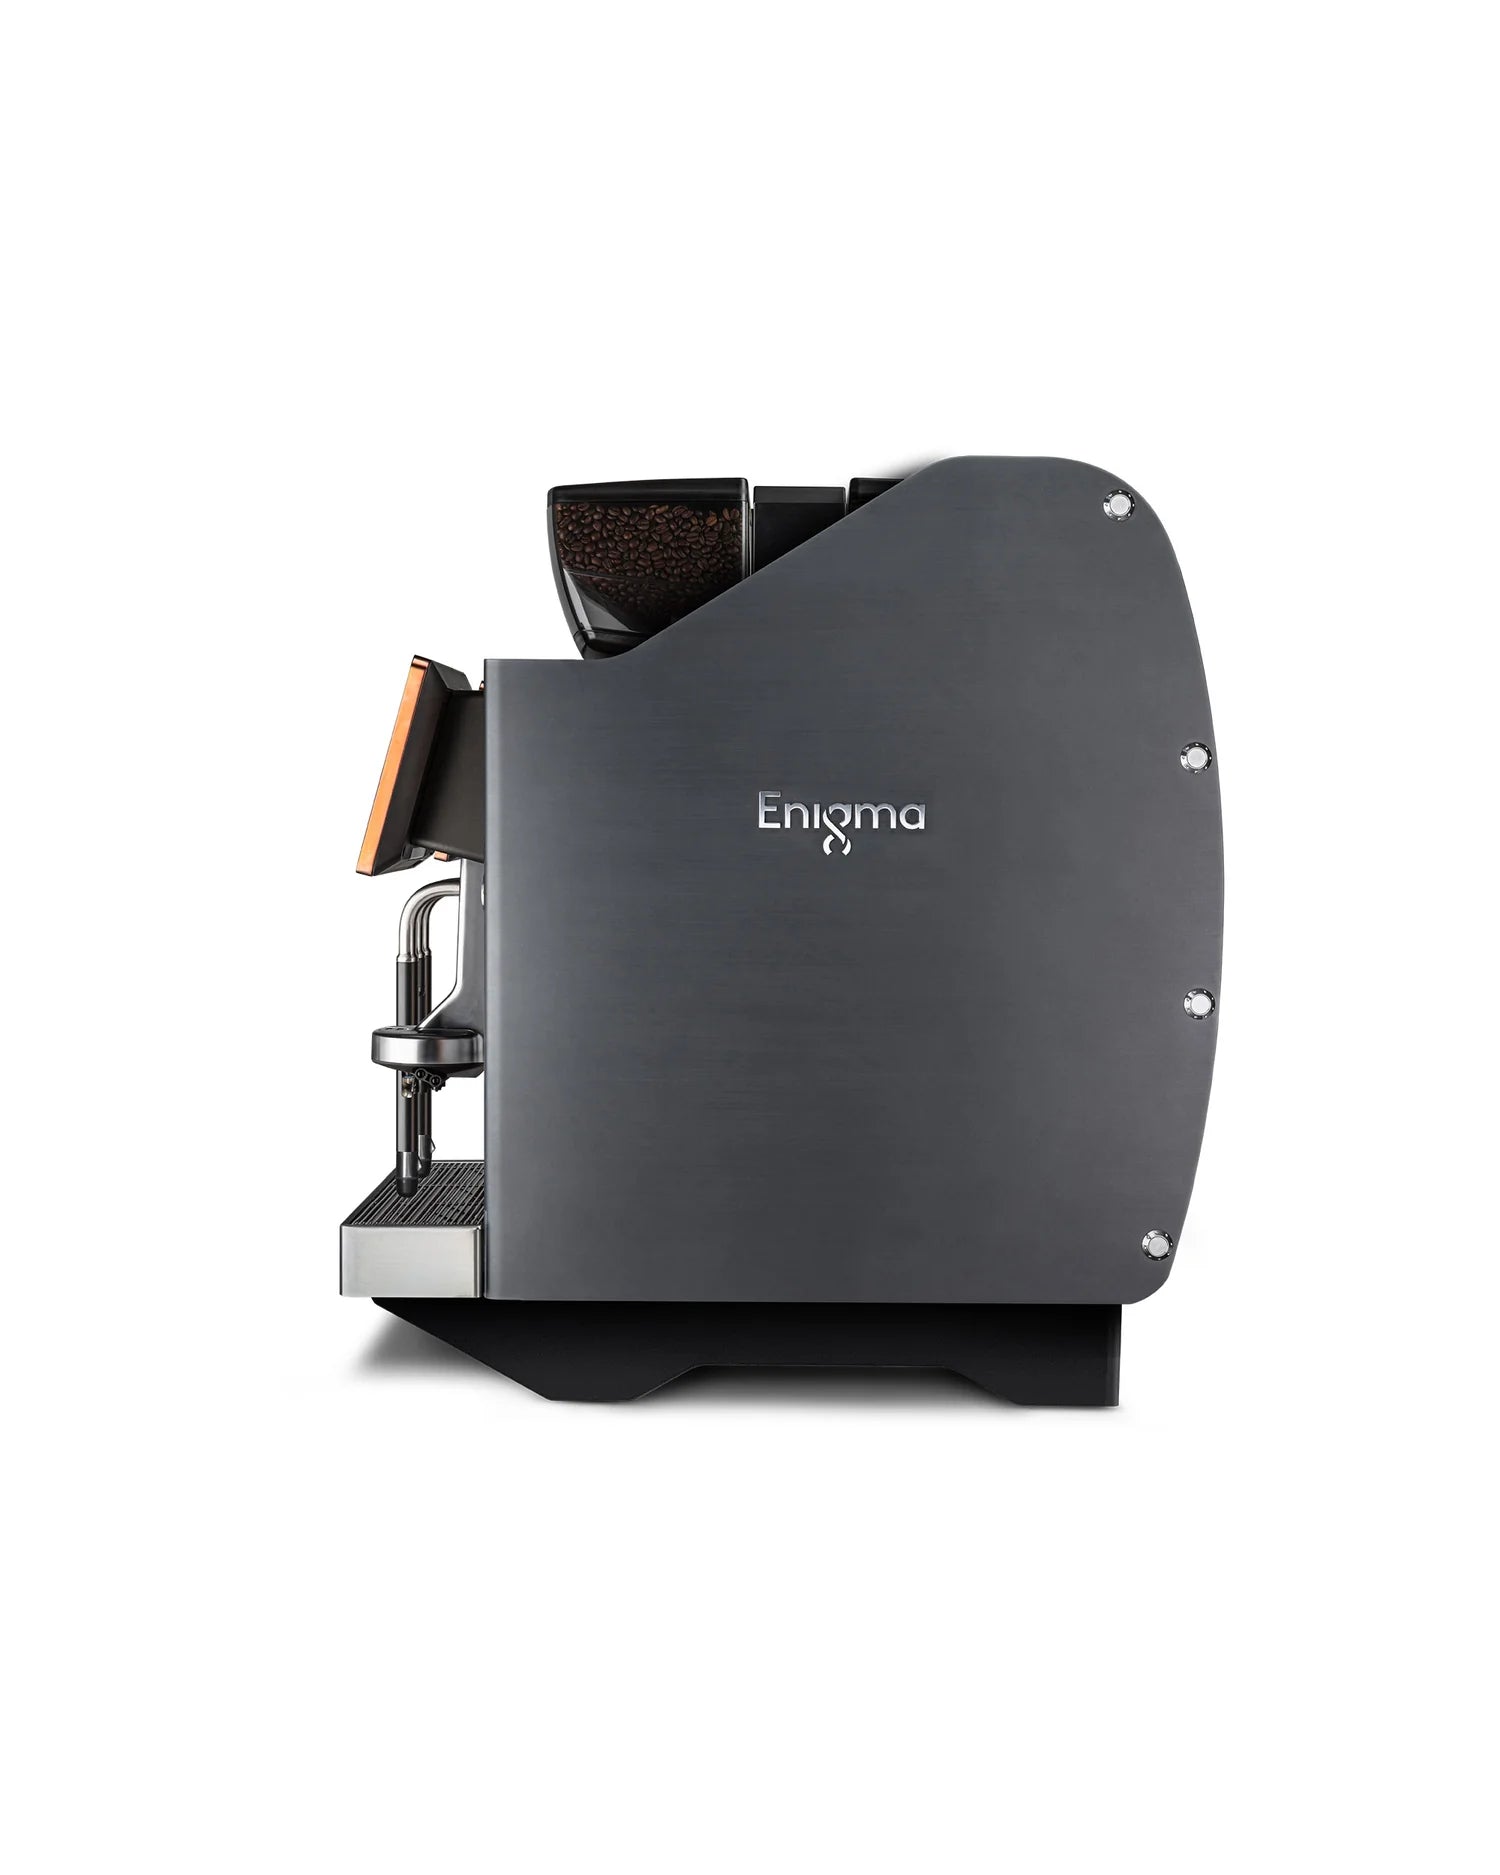 Eversys - Enigma E'4S X-WIDE/ST